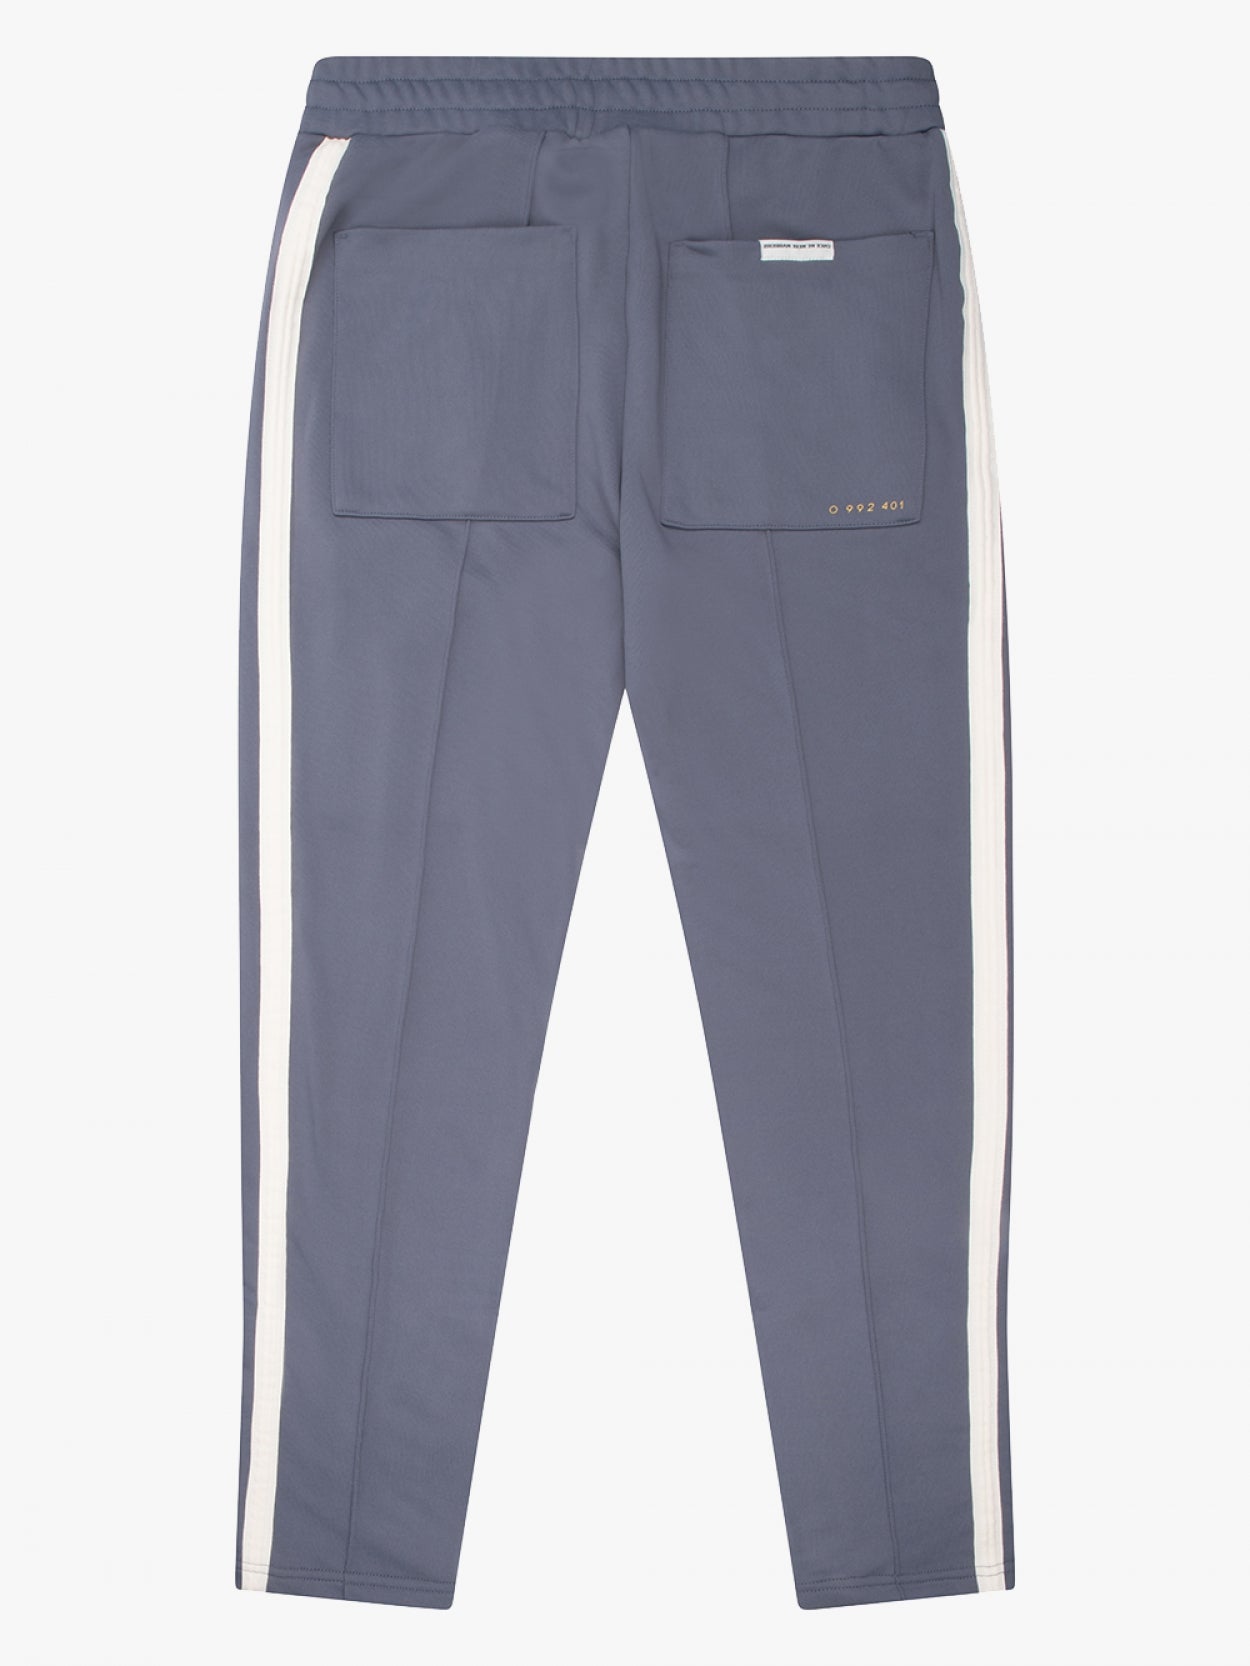 Wesk Track Pants | poppy seed - Once We Were Warriors